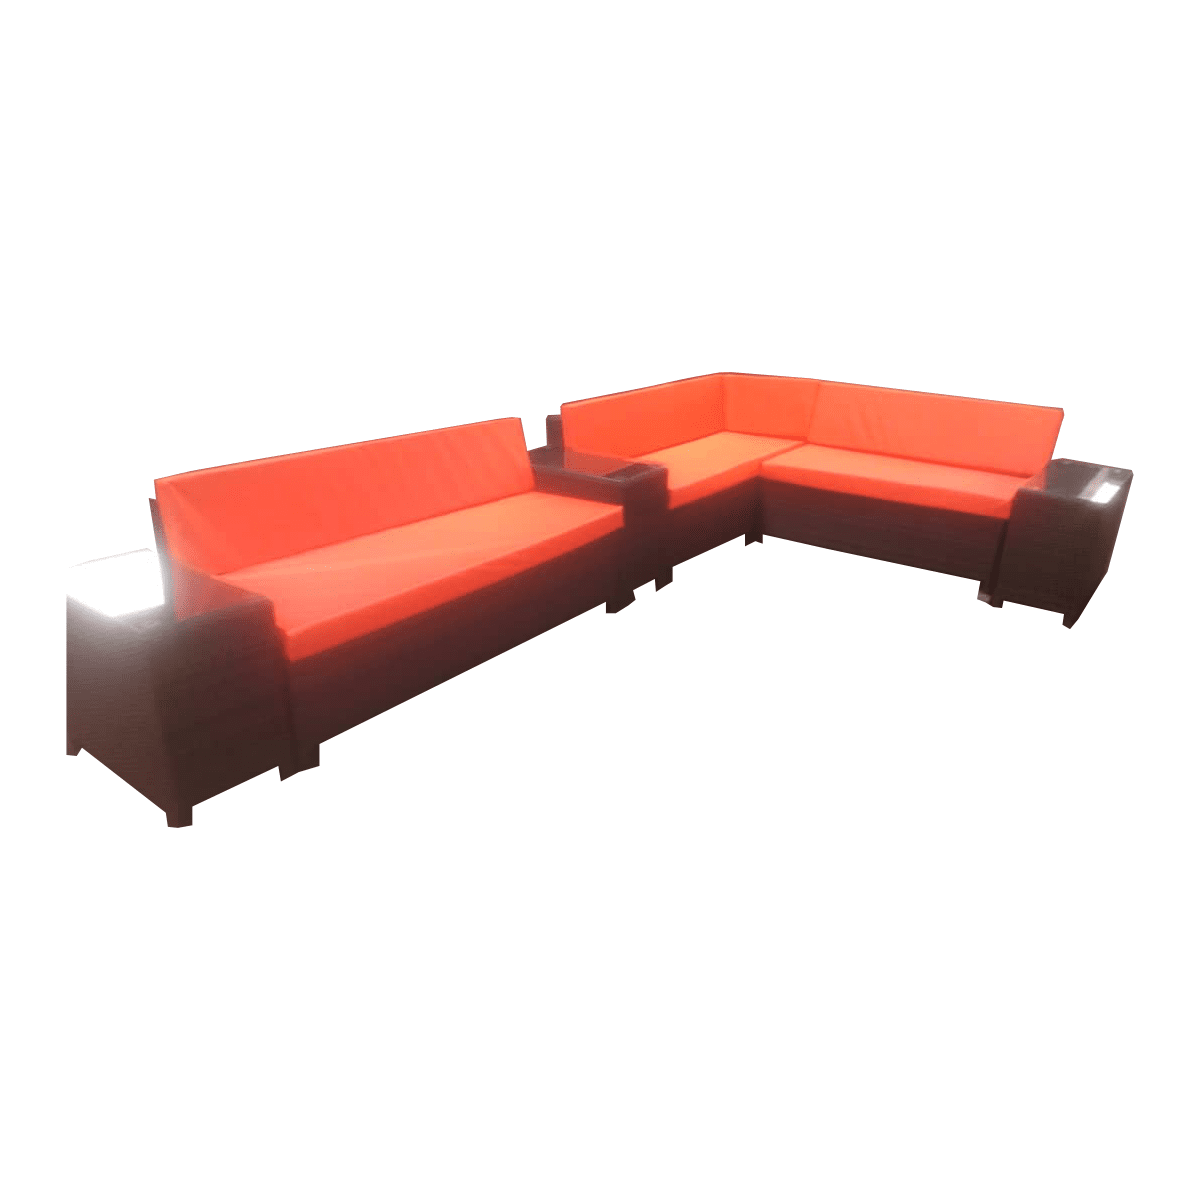 L-Shaped Rattan Garden Furniture Sofa and Side Table Set